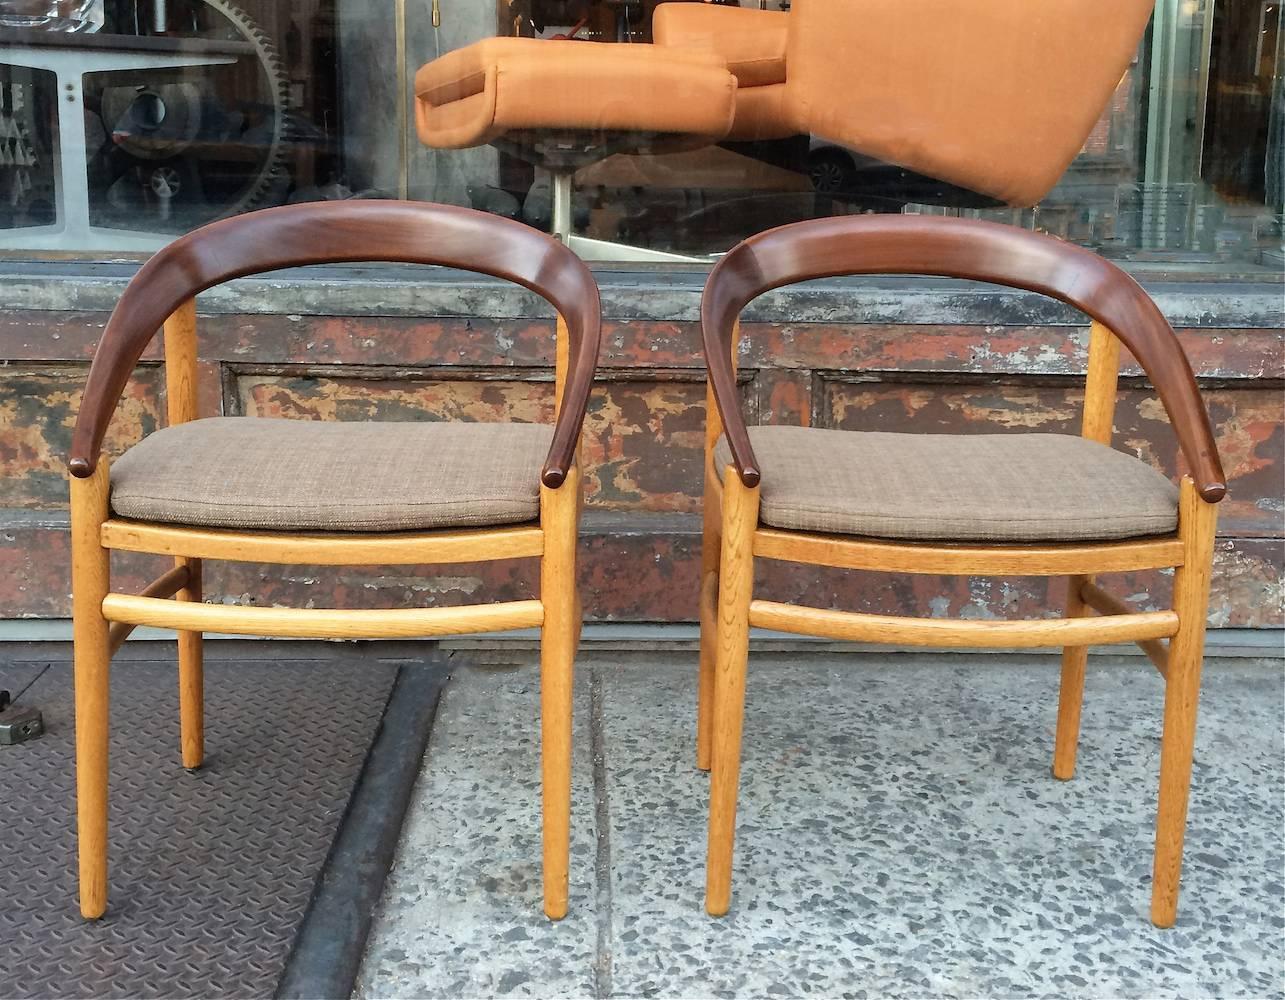 Pair of vintage, barrel back, armchairs by Brockmann Petersen for Poul Jeppesen with two-toned, walnut continuous backs and ash frames, and upholstered woven cotton blend seat cushions. Chairs are marked Model 123 Denmark.